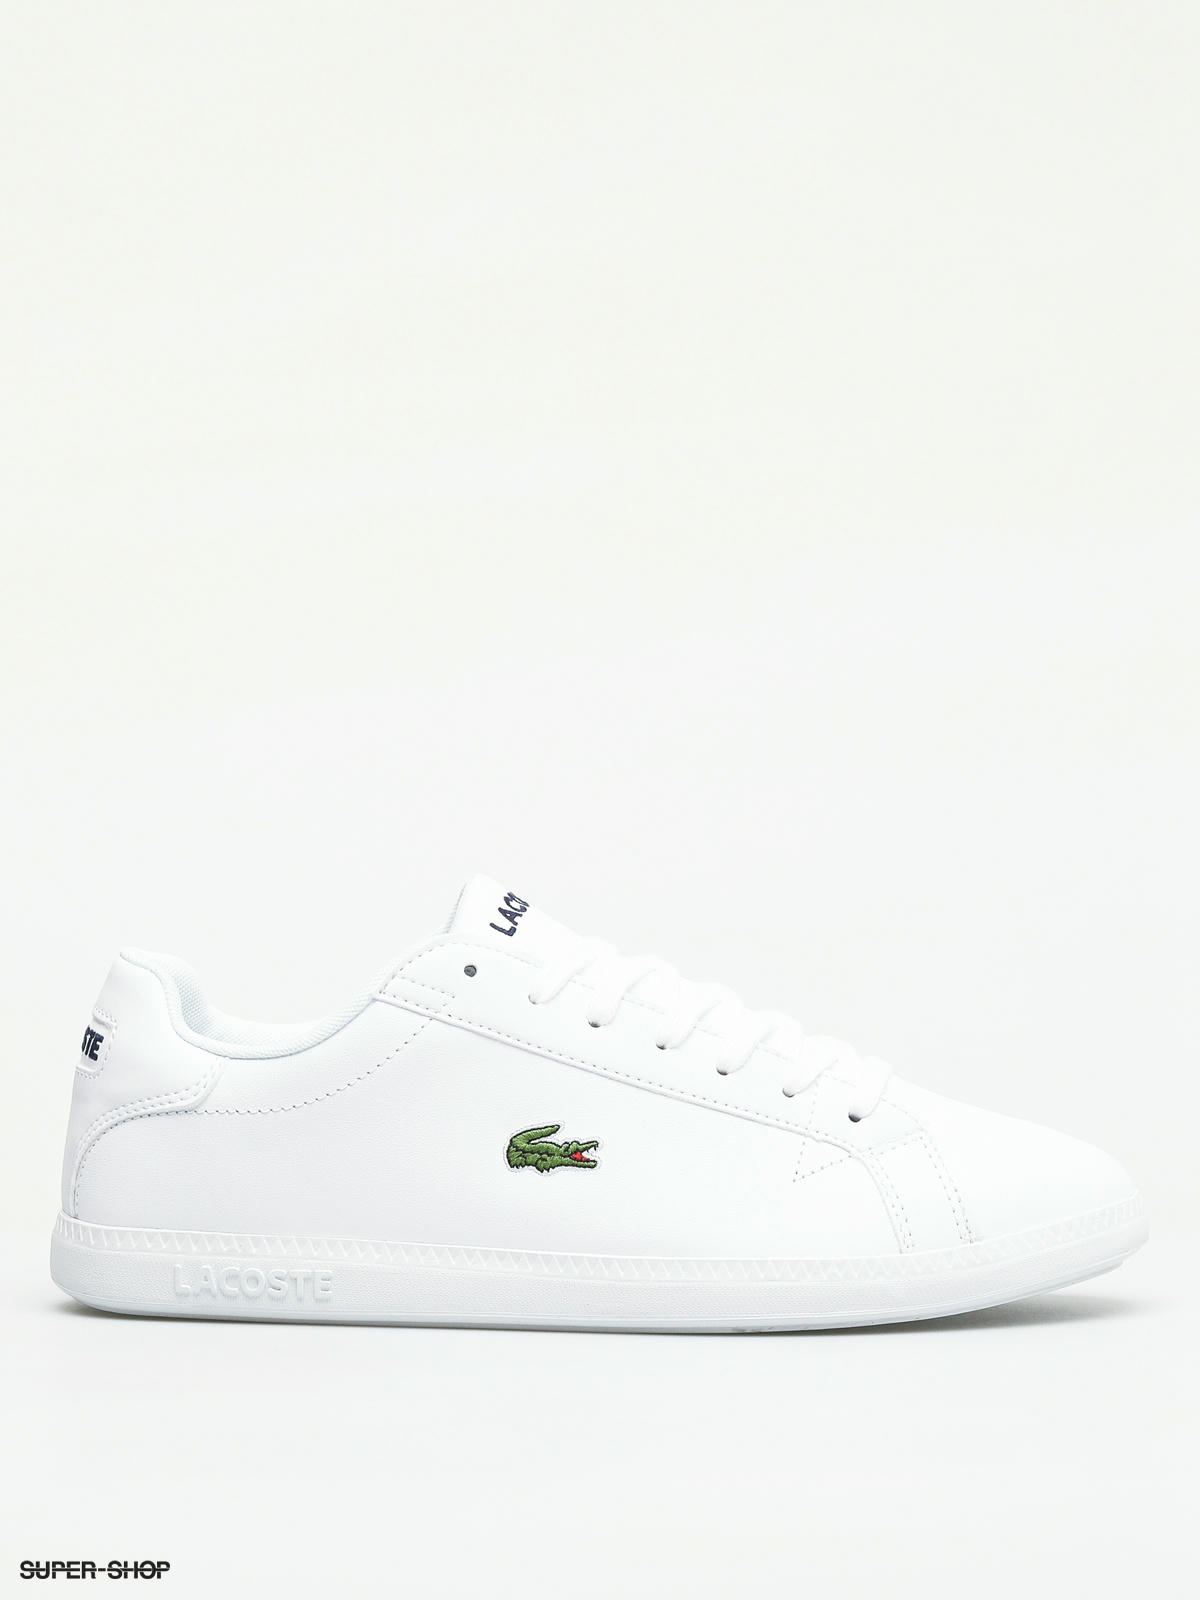 Lacoste | Lacoste, Sneakers, City golf